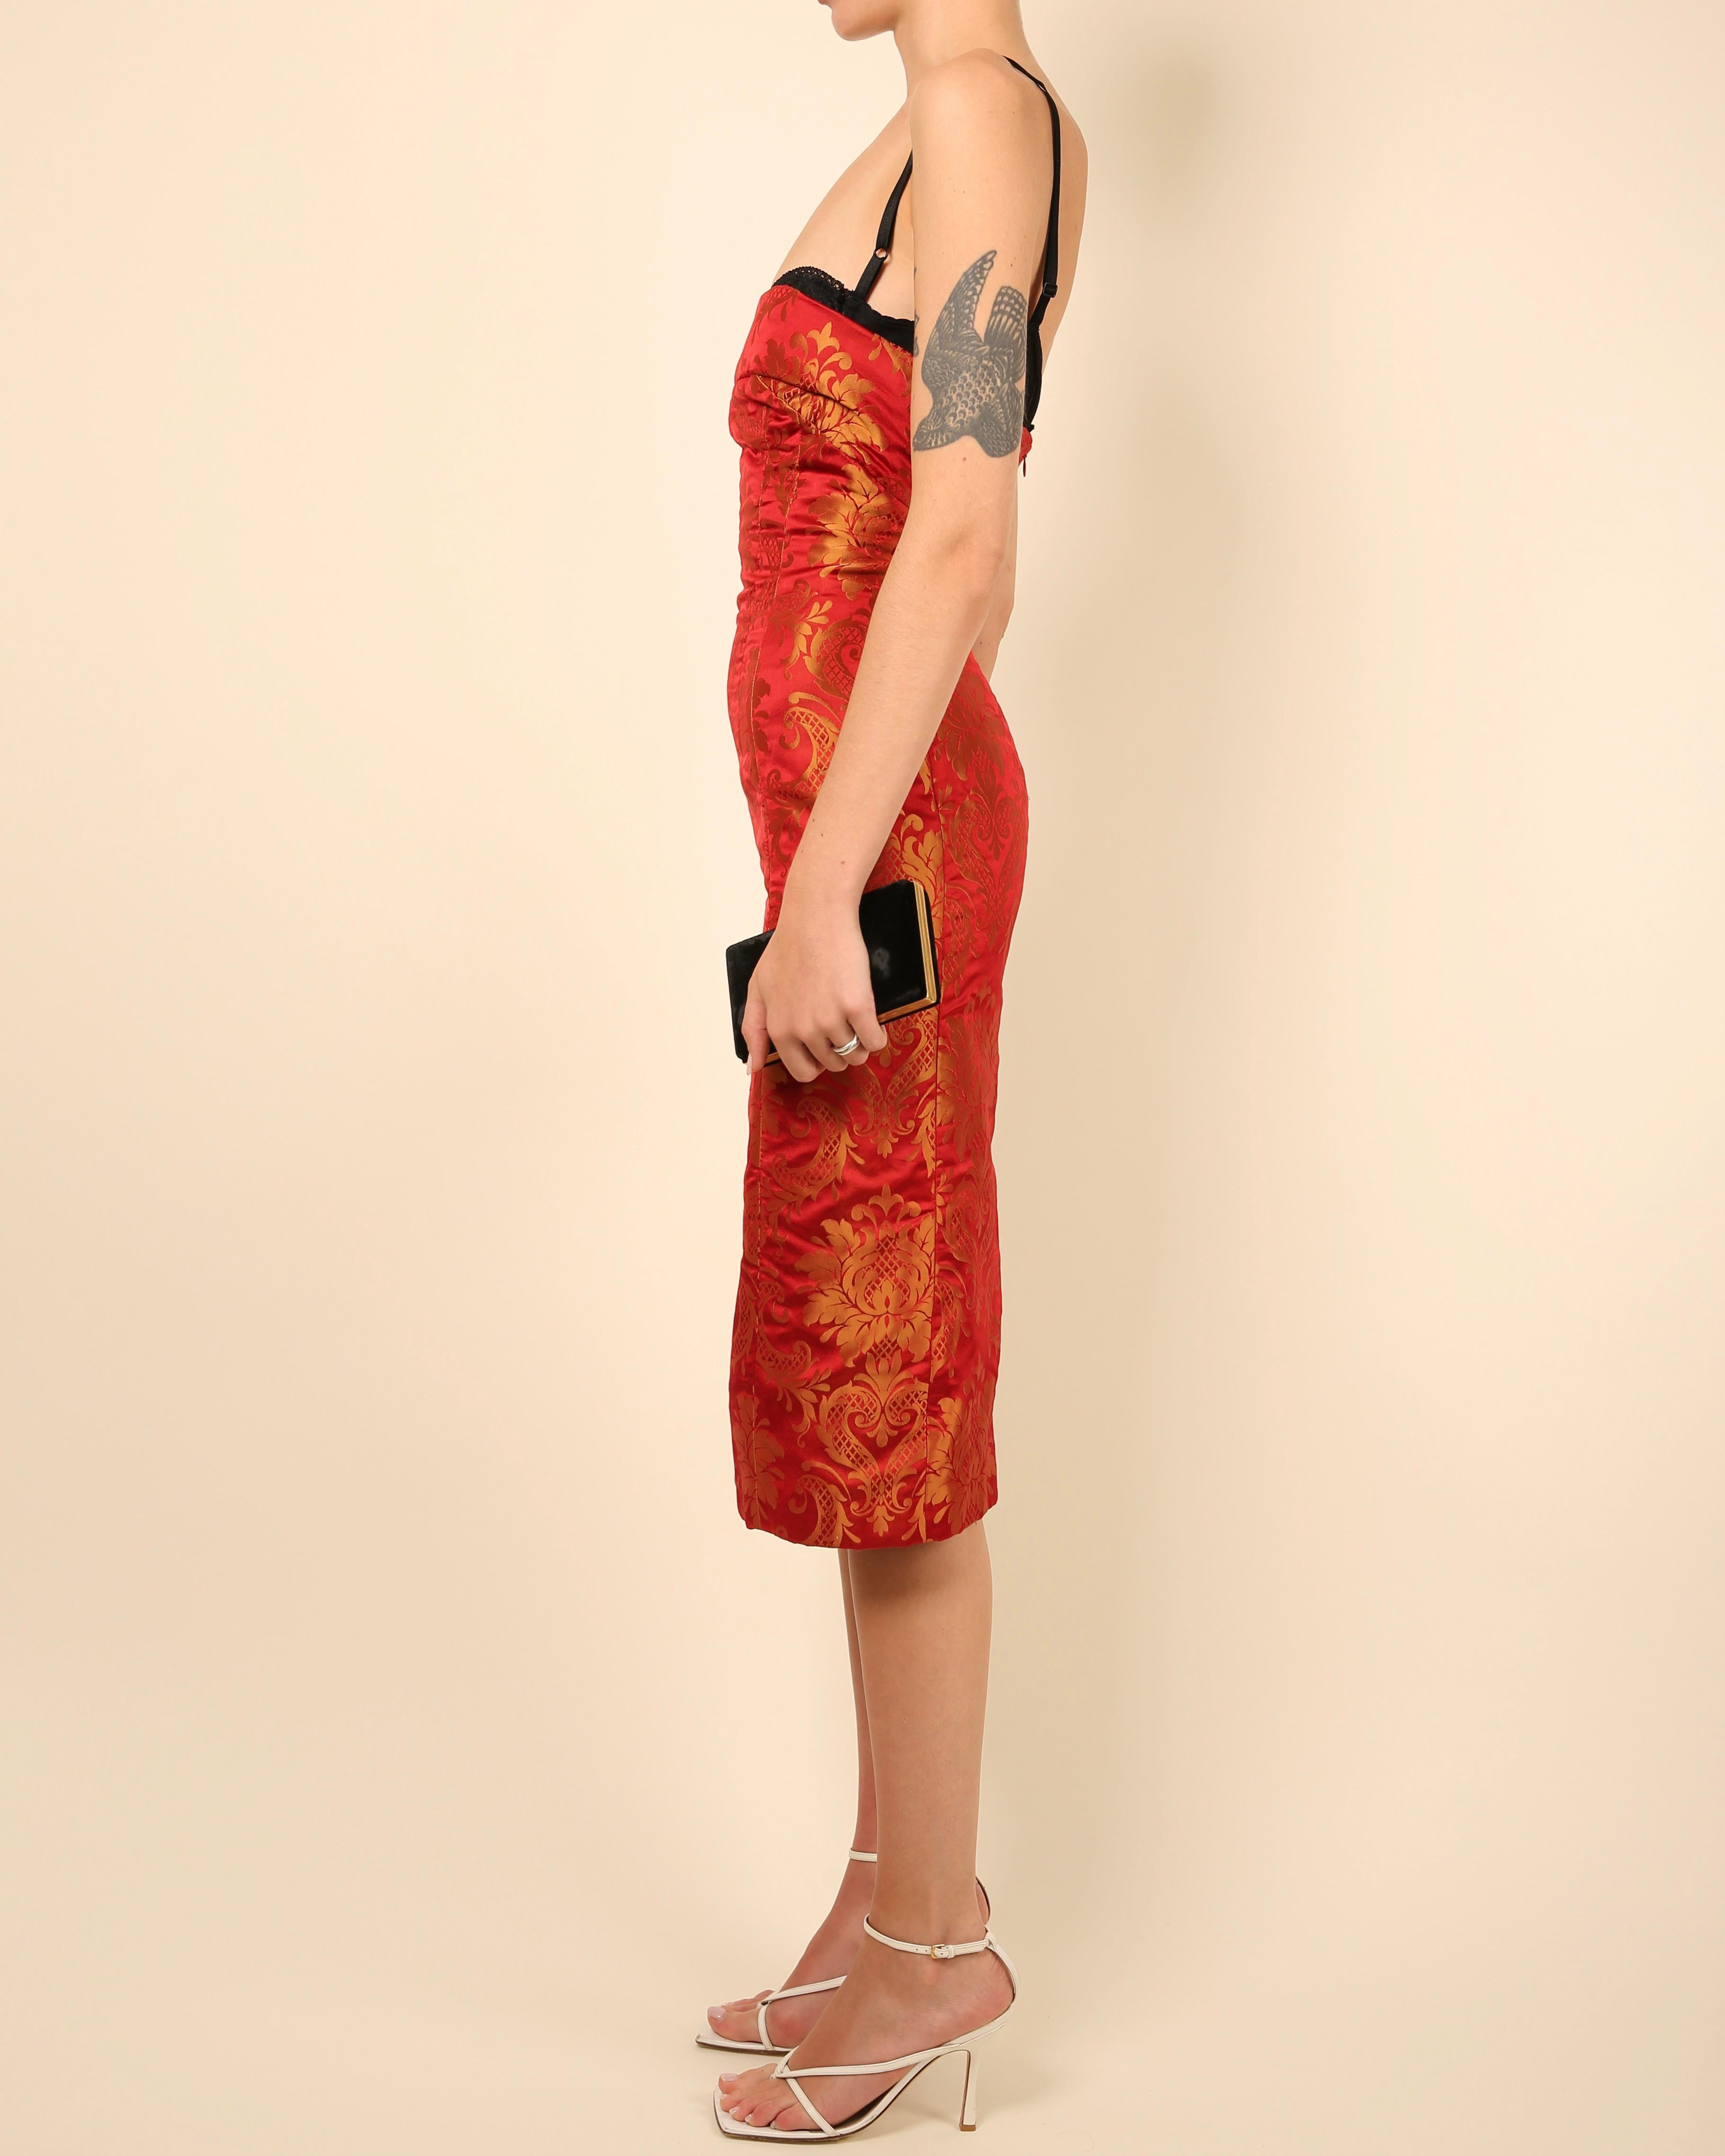 Dolce & Gabbana red gold floral print oriental asian style bustier midi dress For Sale 5